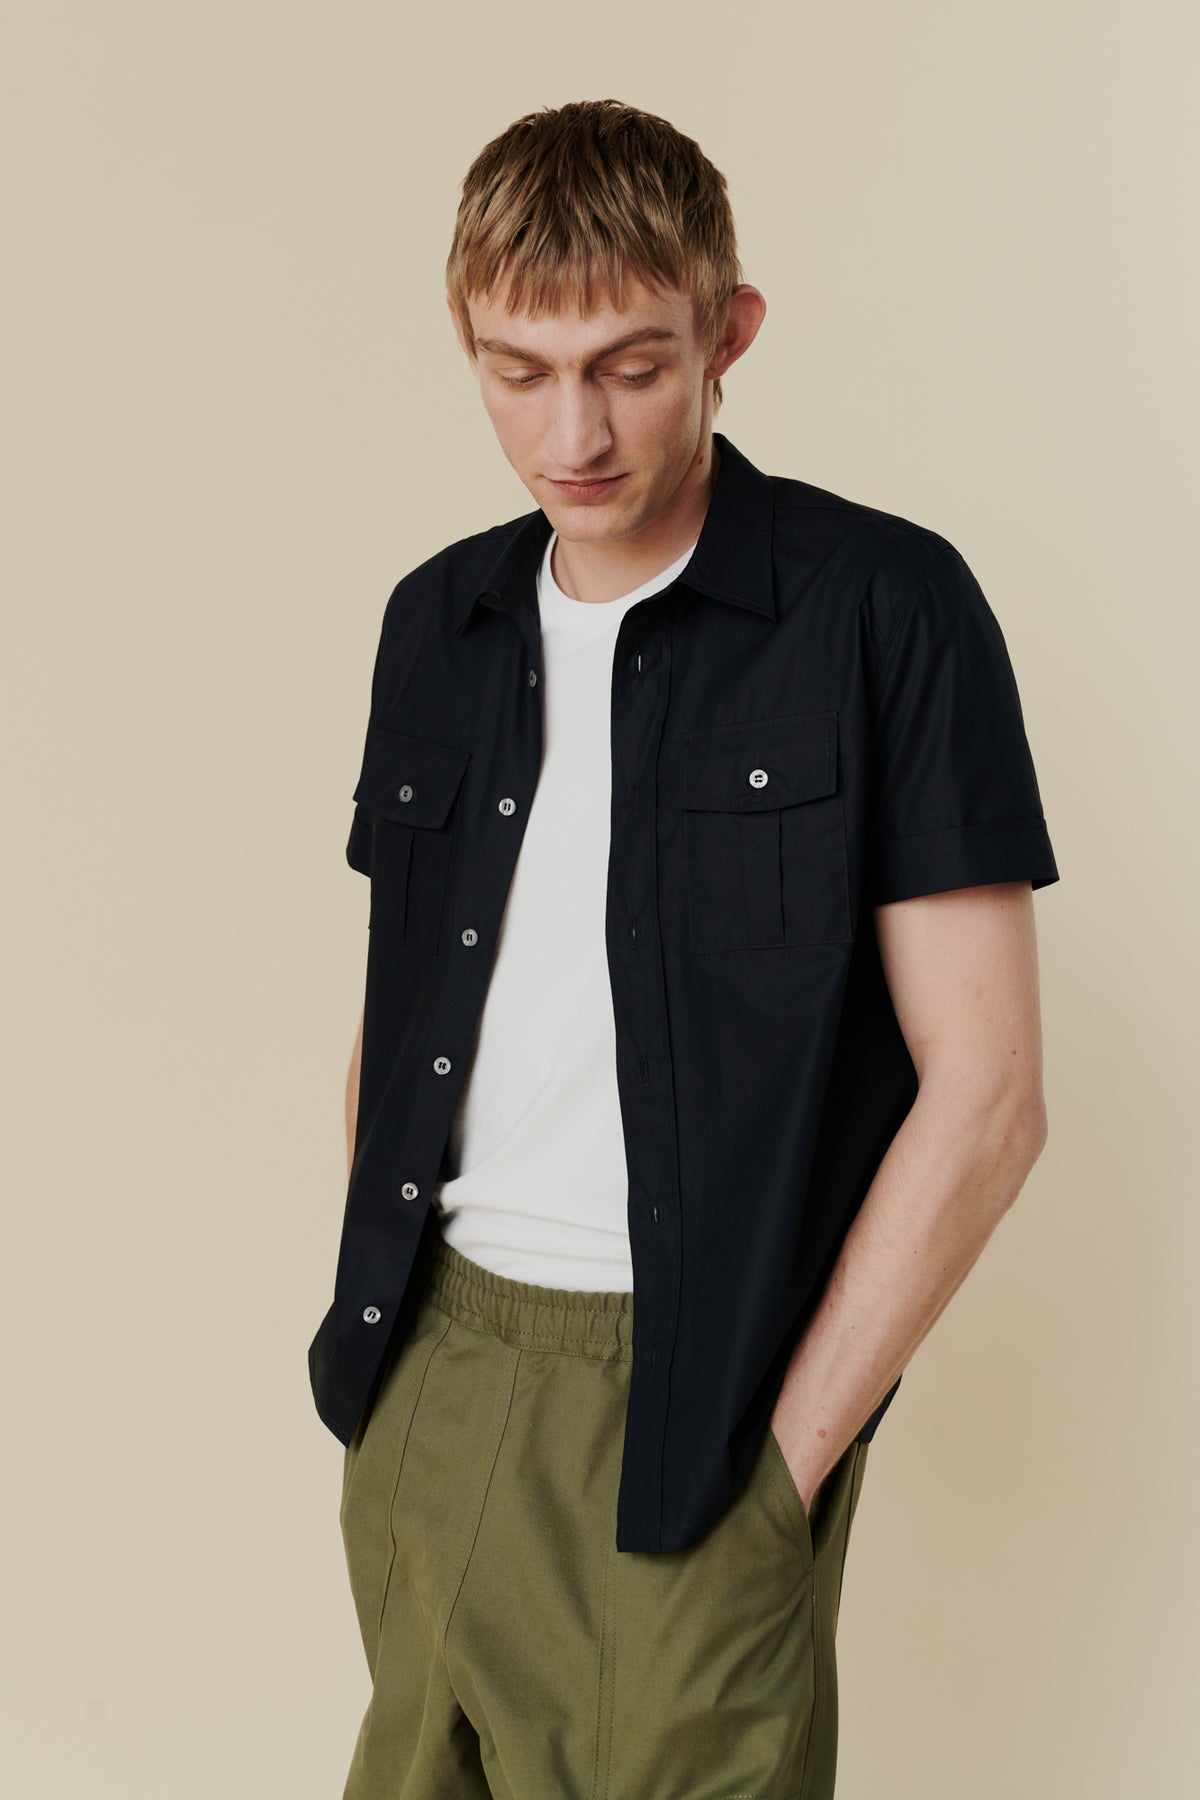 
            Tom short sleeve military shirt in navy unbuttoned over white short sleeve crew neck t shirt with olive cameraman pants